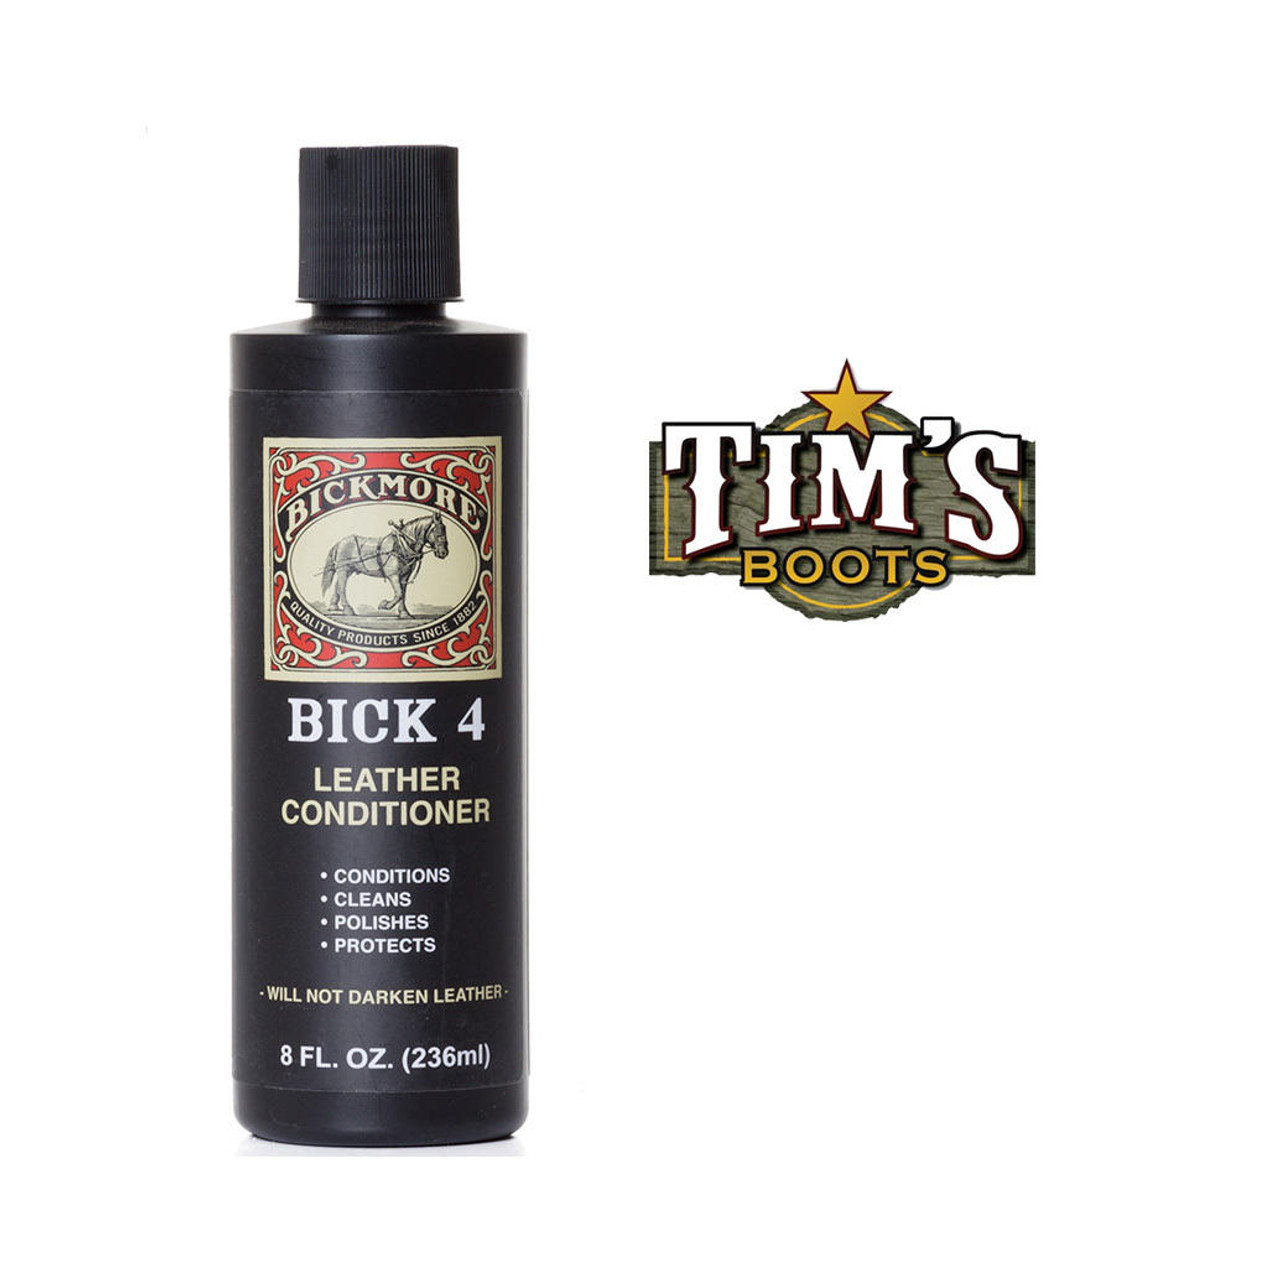  Bick 4 Leather Conditioner and Leather Cleaner 8 oz - Will Not  Darken Leather - Safe For All Colors of Leather Apparel, Furniture,  Jackets, Shoes, Auto Interiors, Bags & All Other